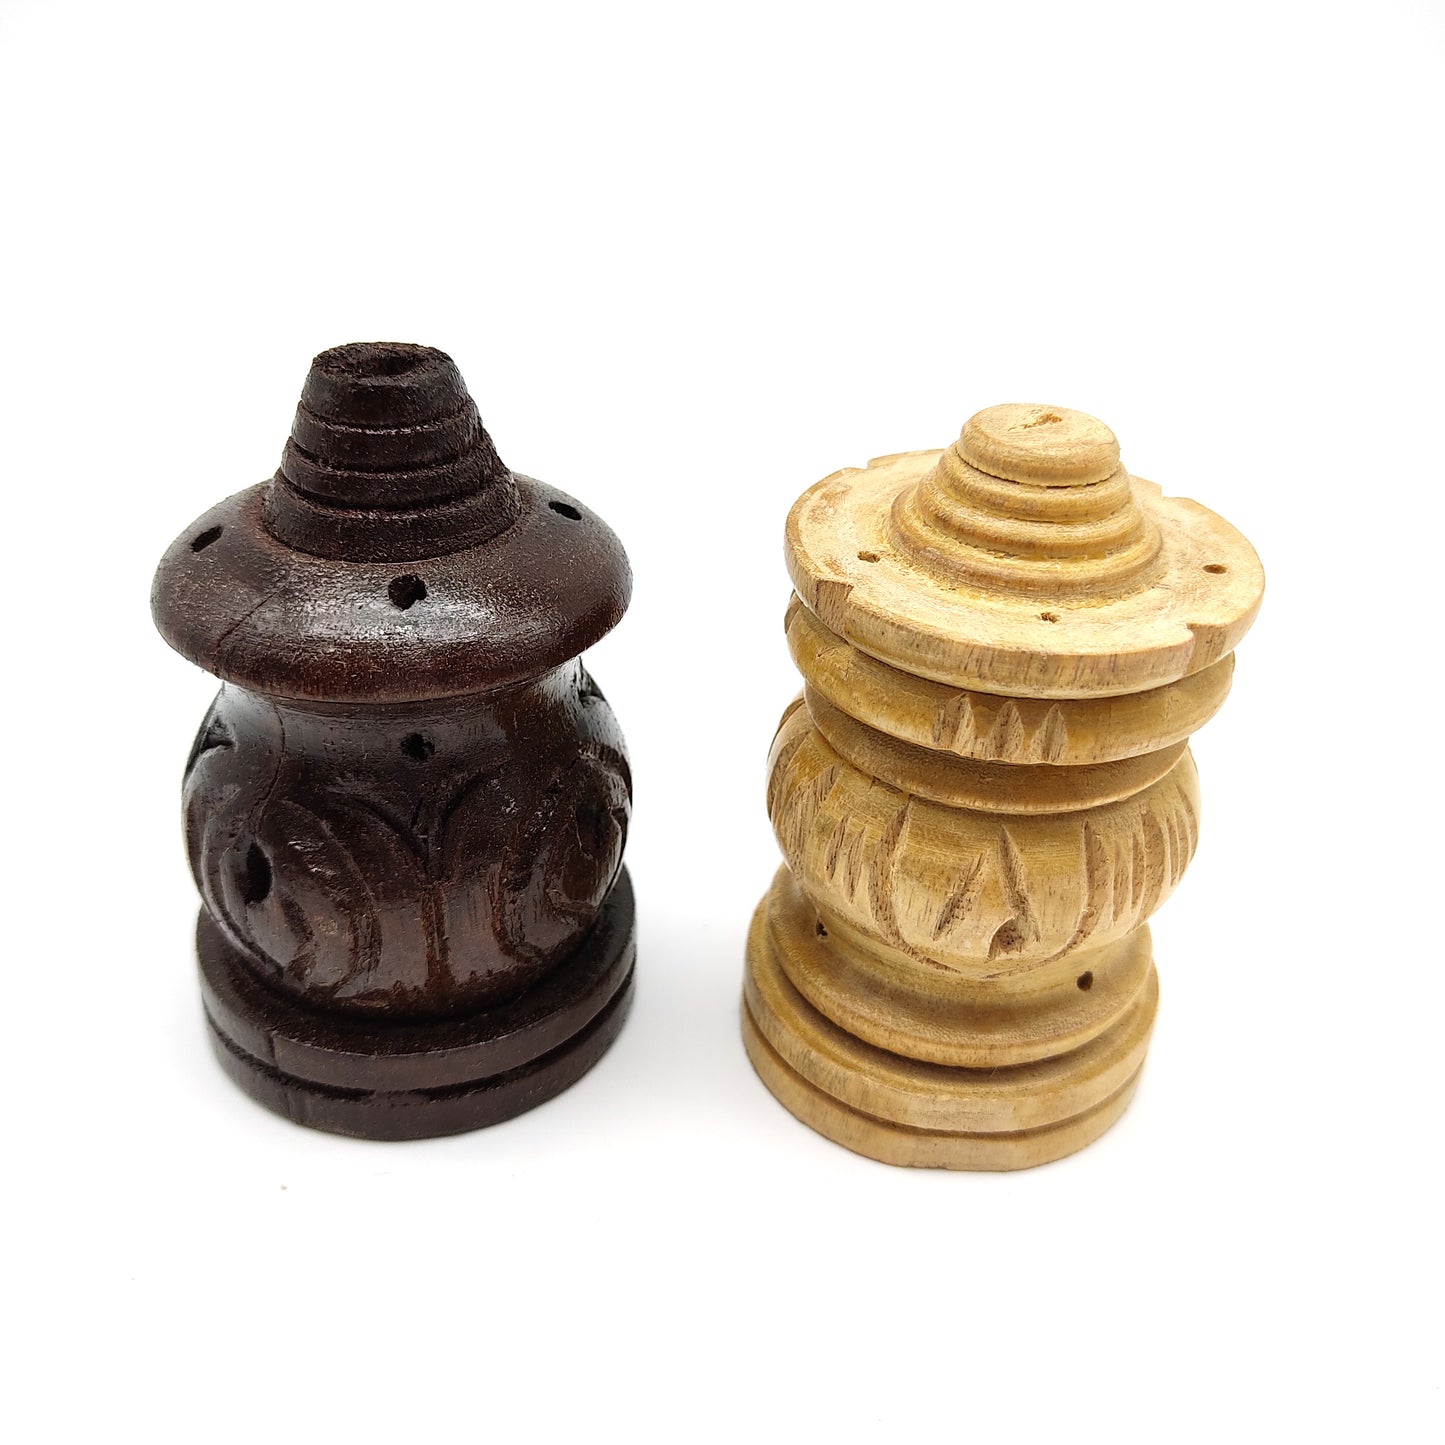 Pair Wooden Stick Incense Burner All Natural Incense Holders India Hand-carved